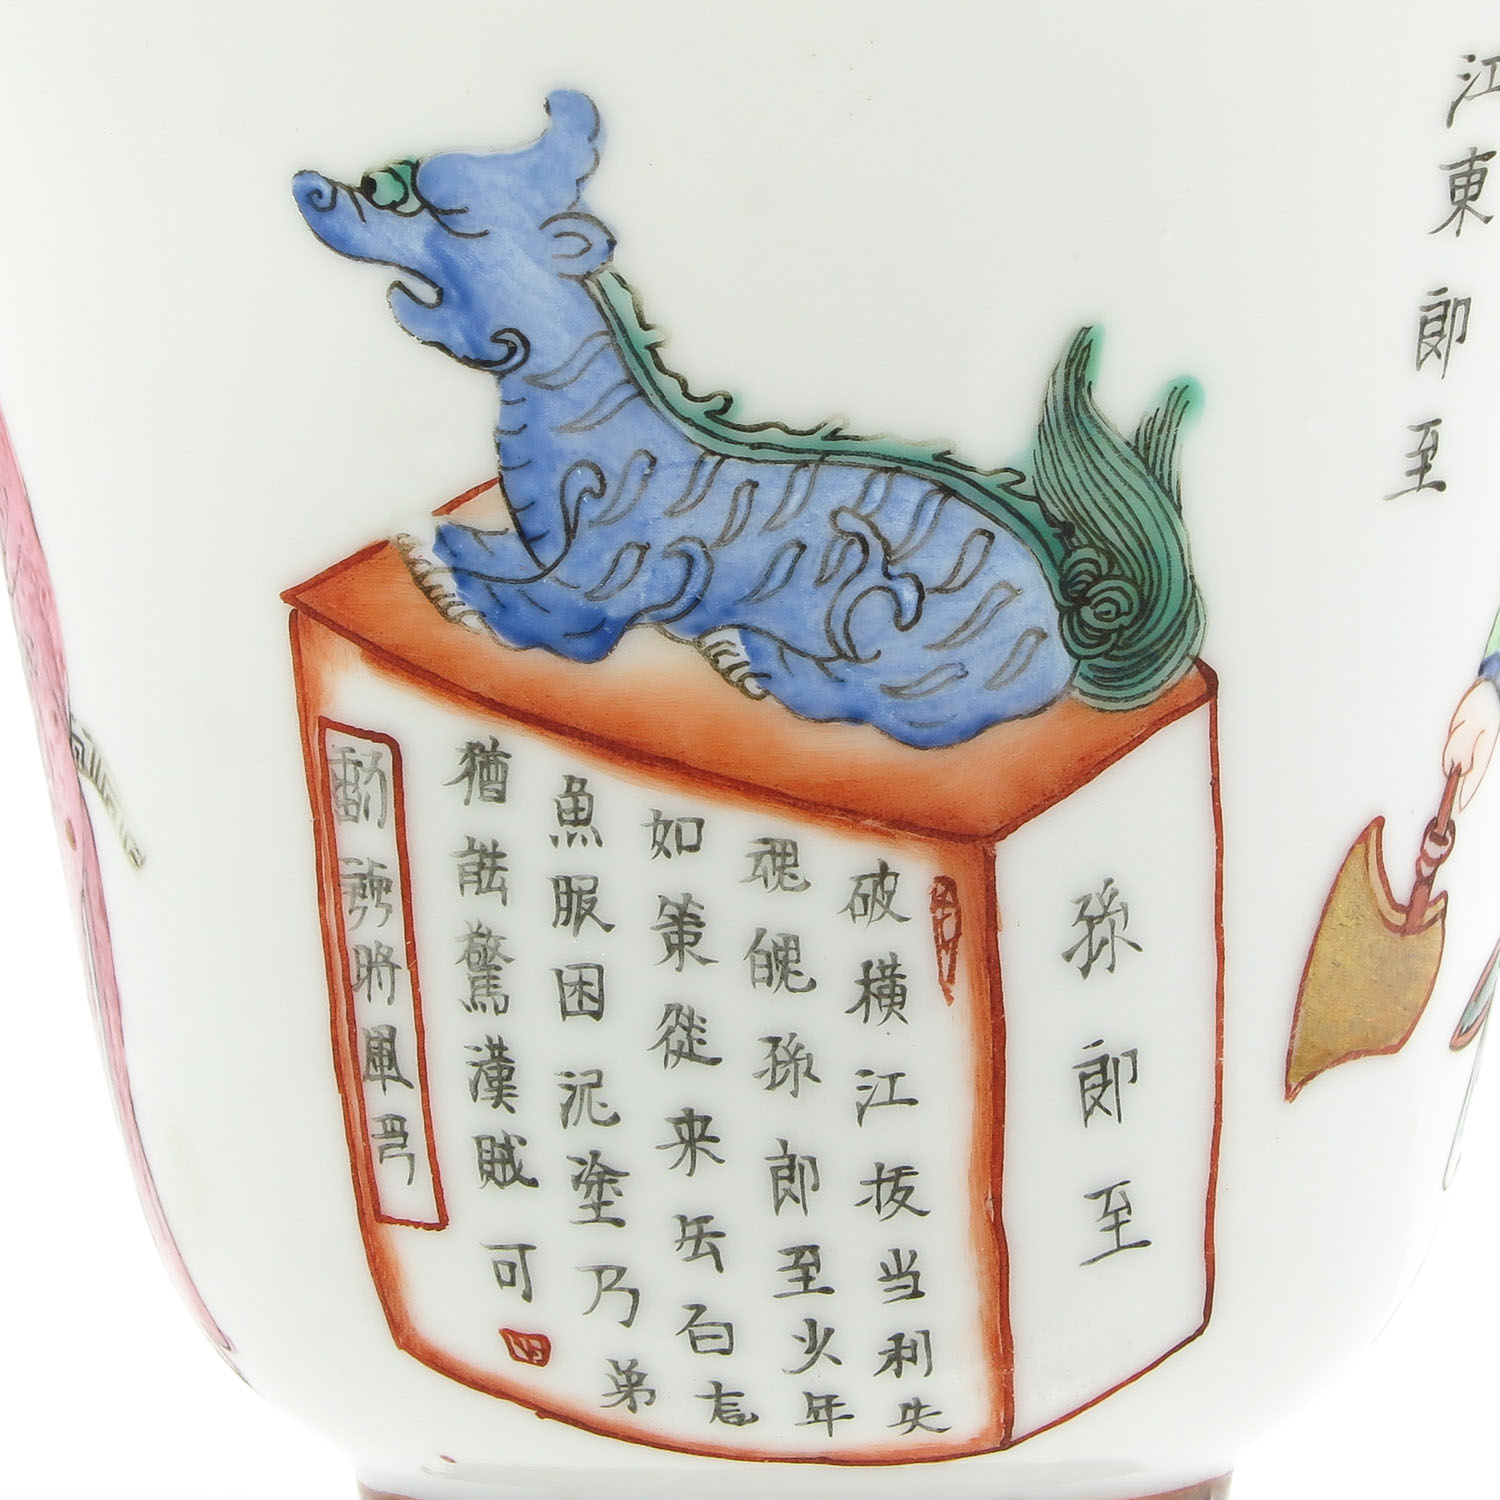 A Wu Shuang Pu Decor Cup and Saucer - Image 10 of 10